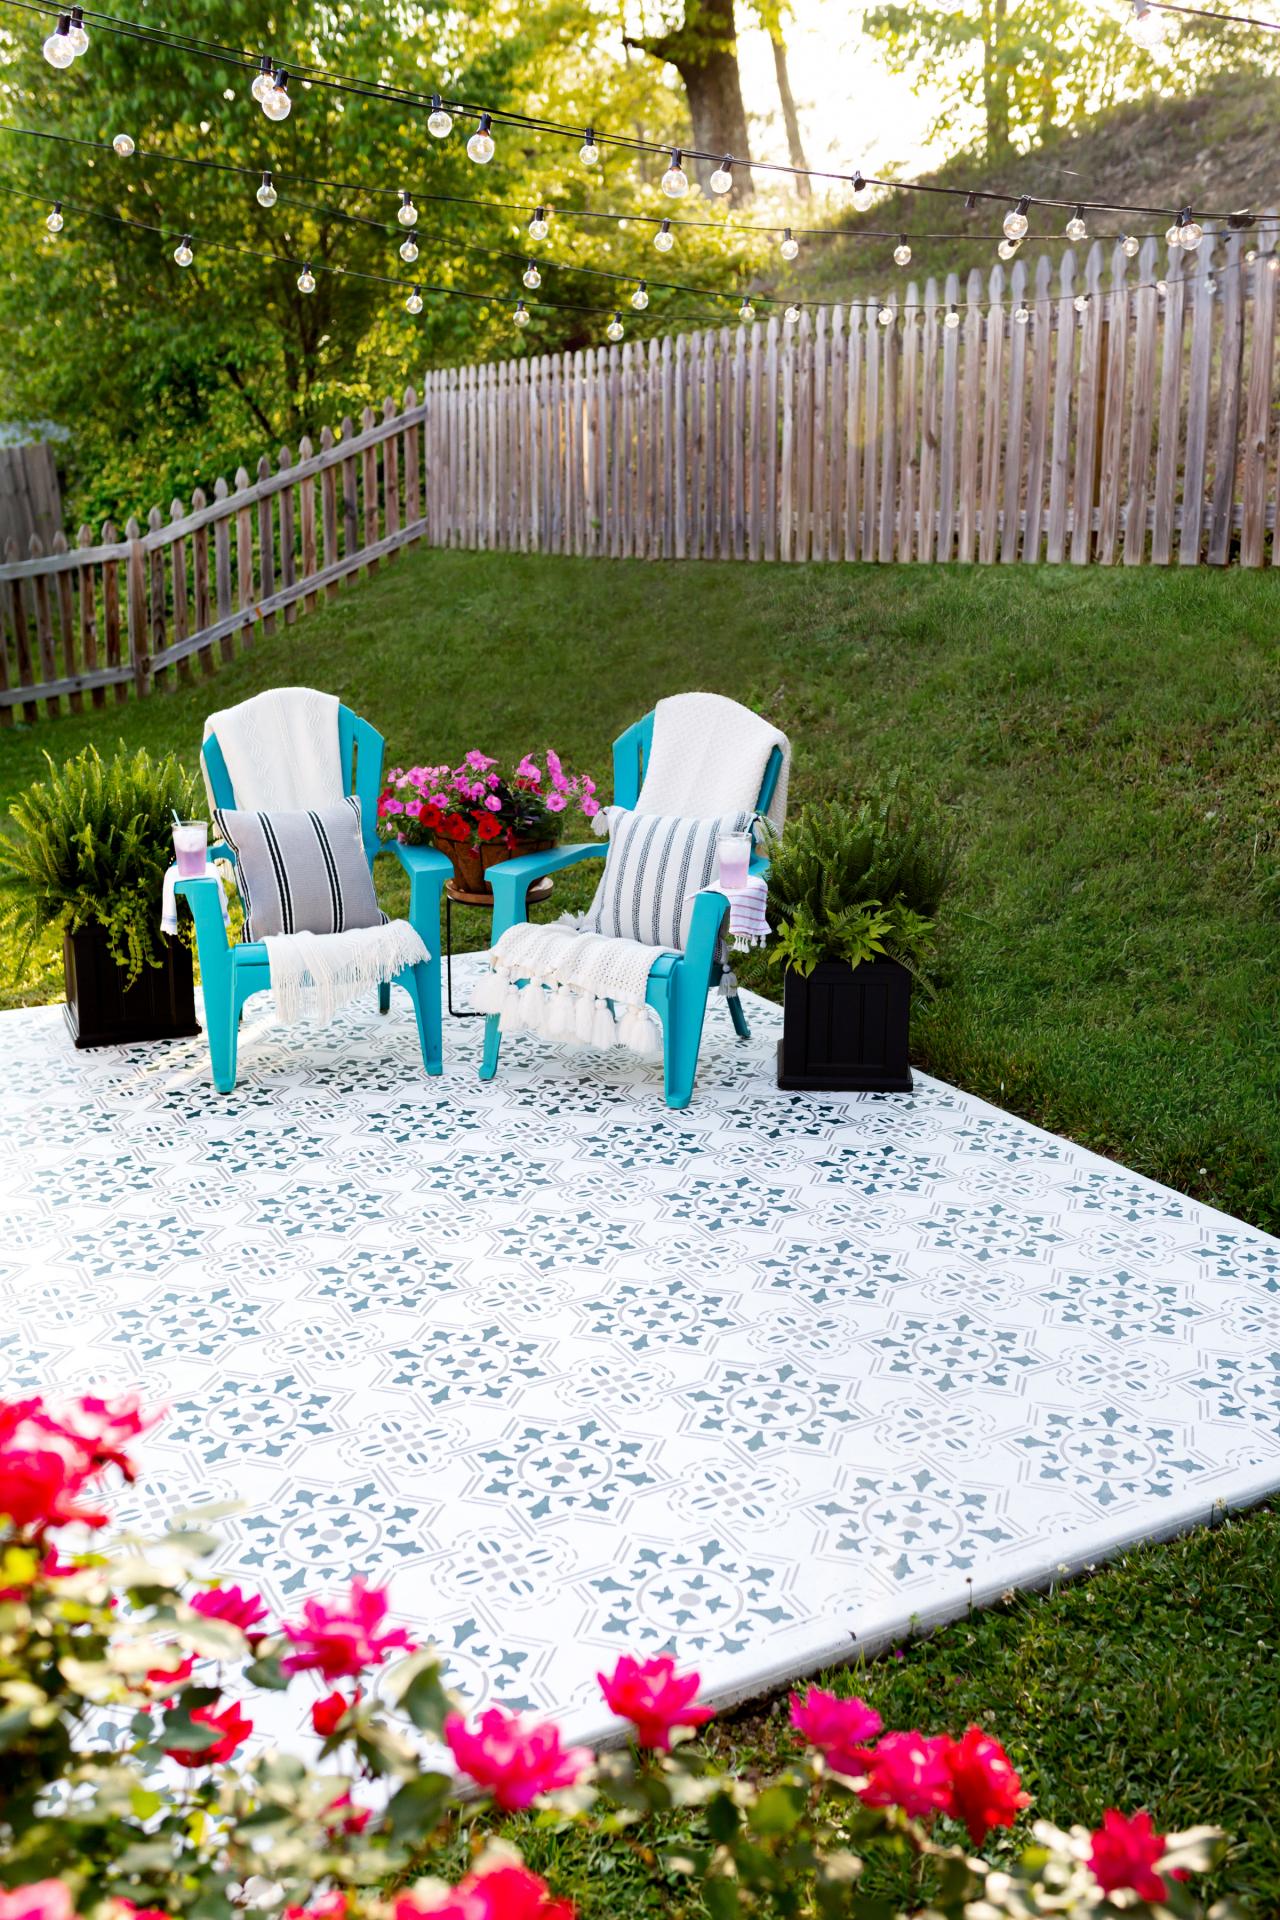 How To Stain Stencil A Concrete Patio, How To Paint Concrete Patio Furniture